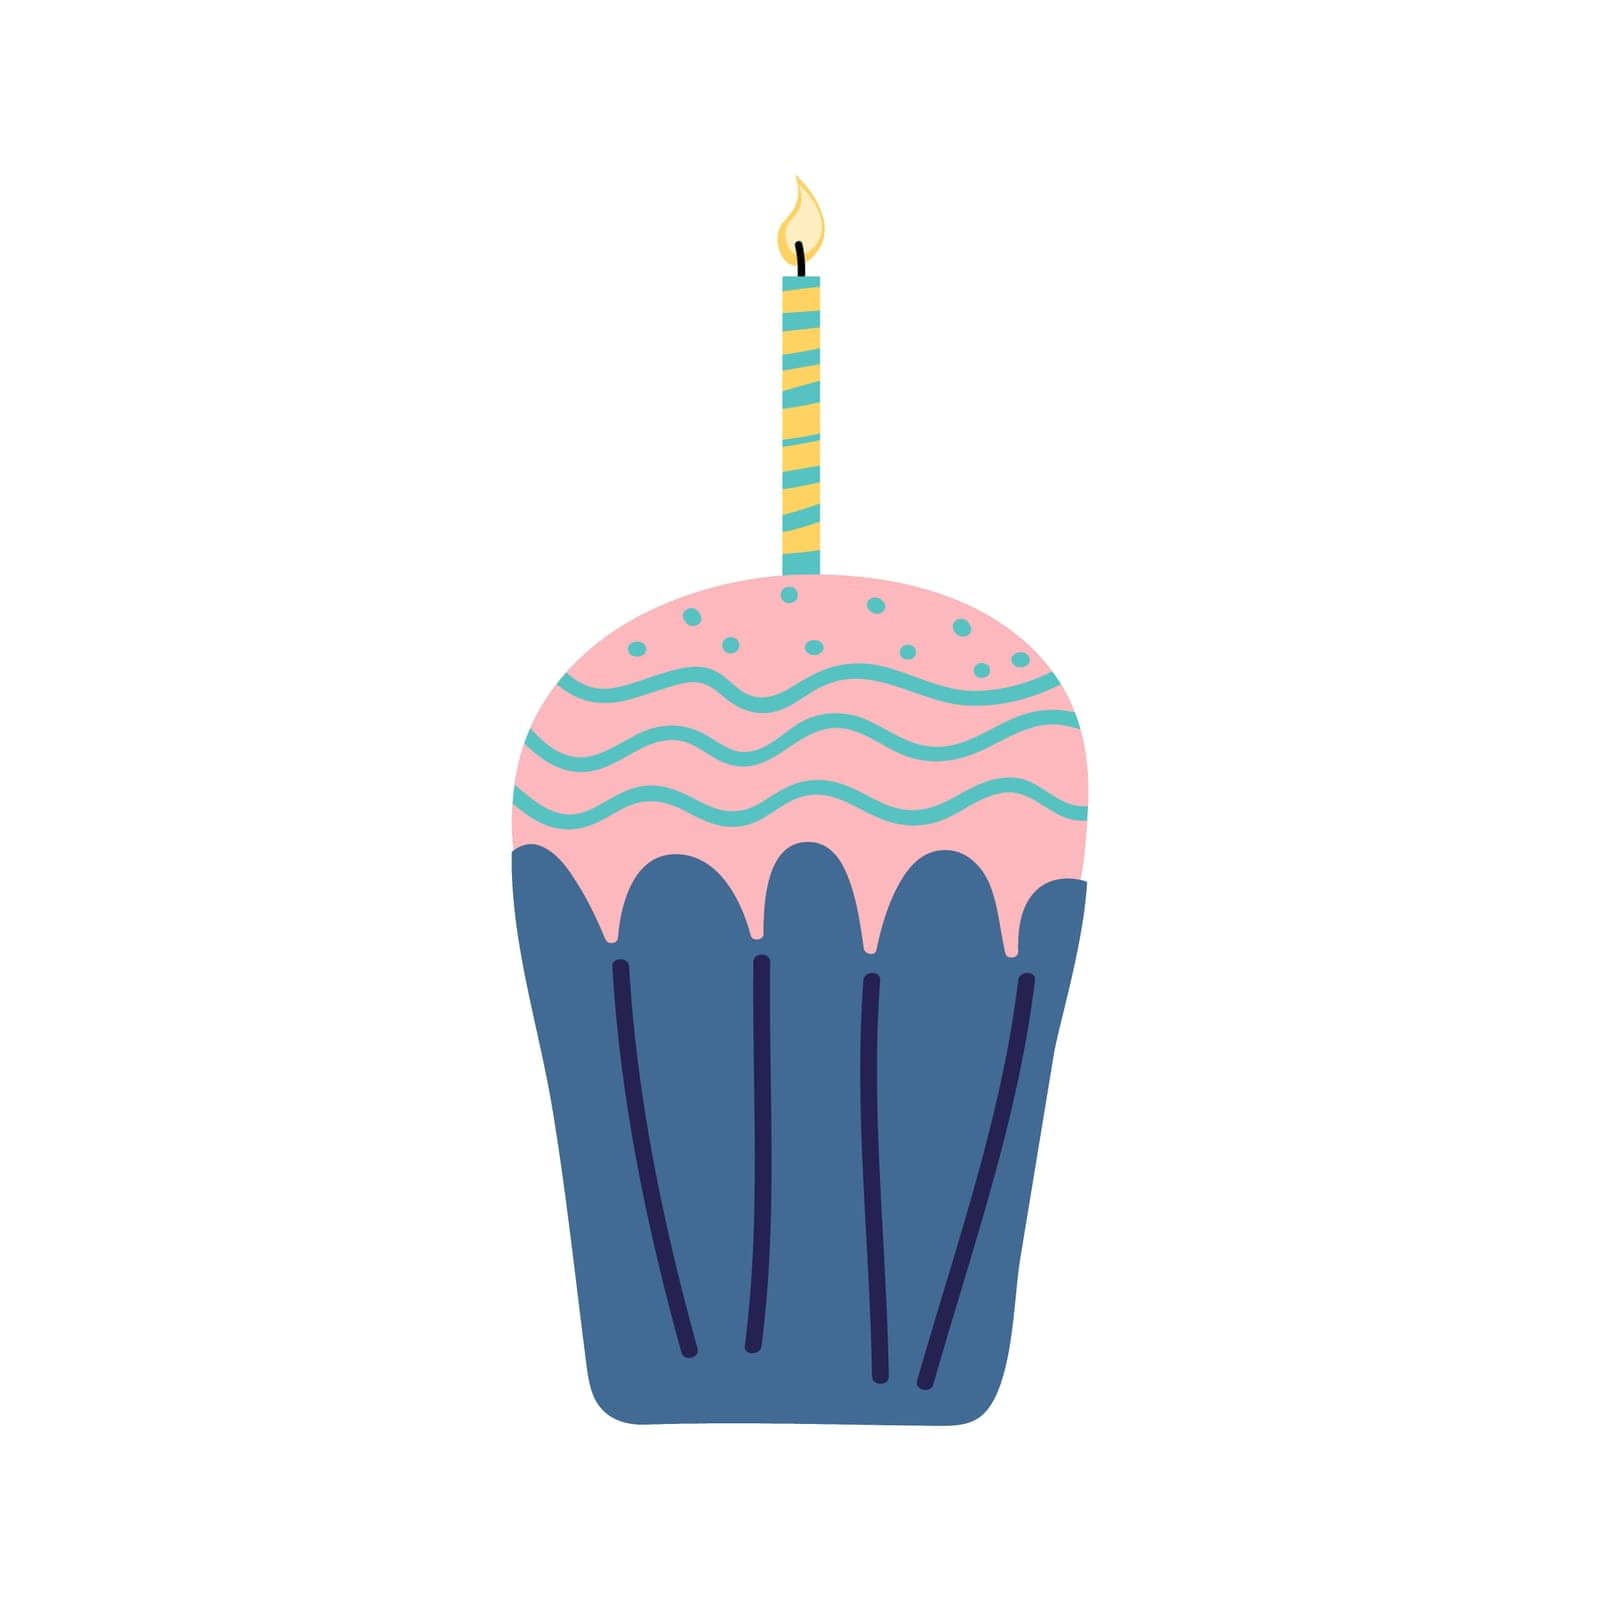 Cupcake with a candle on a birthday, flat. Vector illustration. EPS by Alxyzt